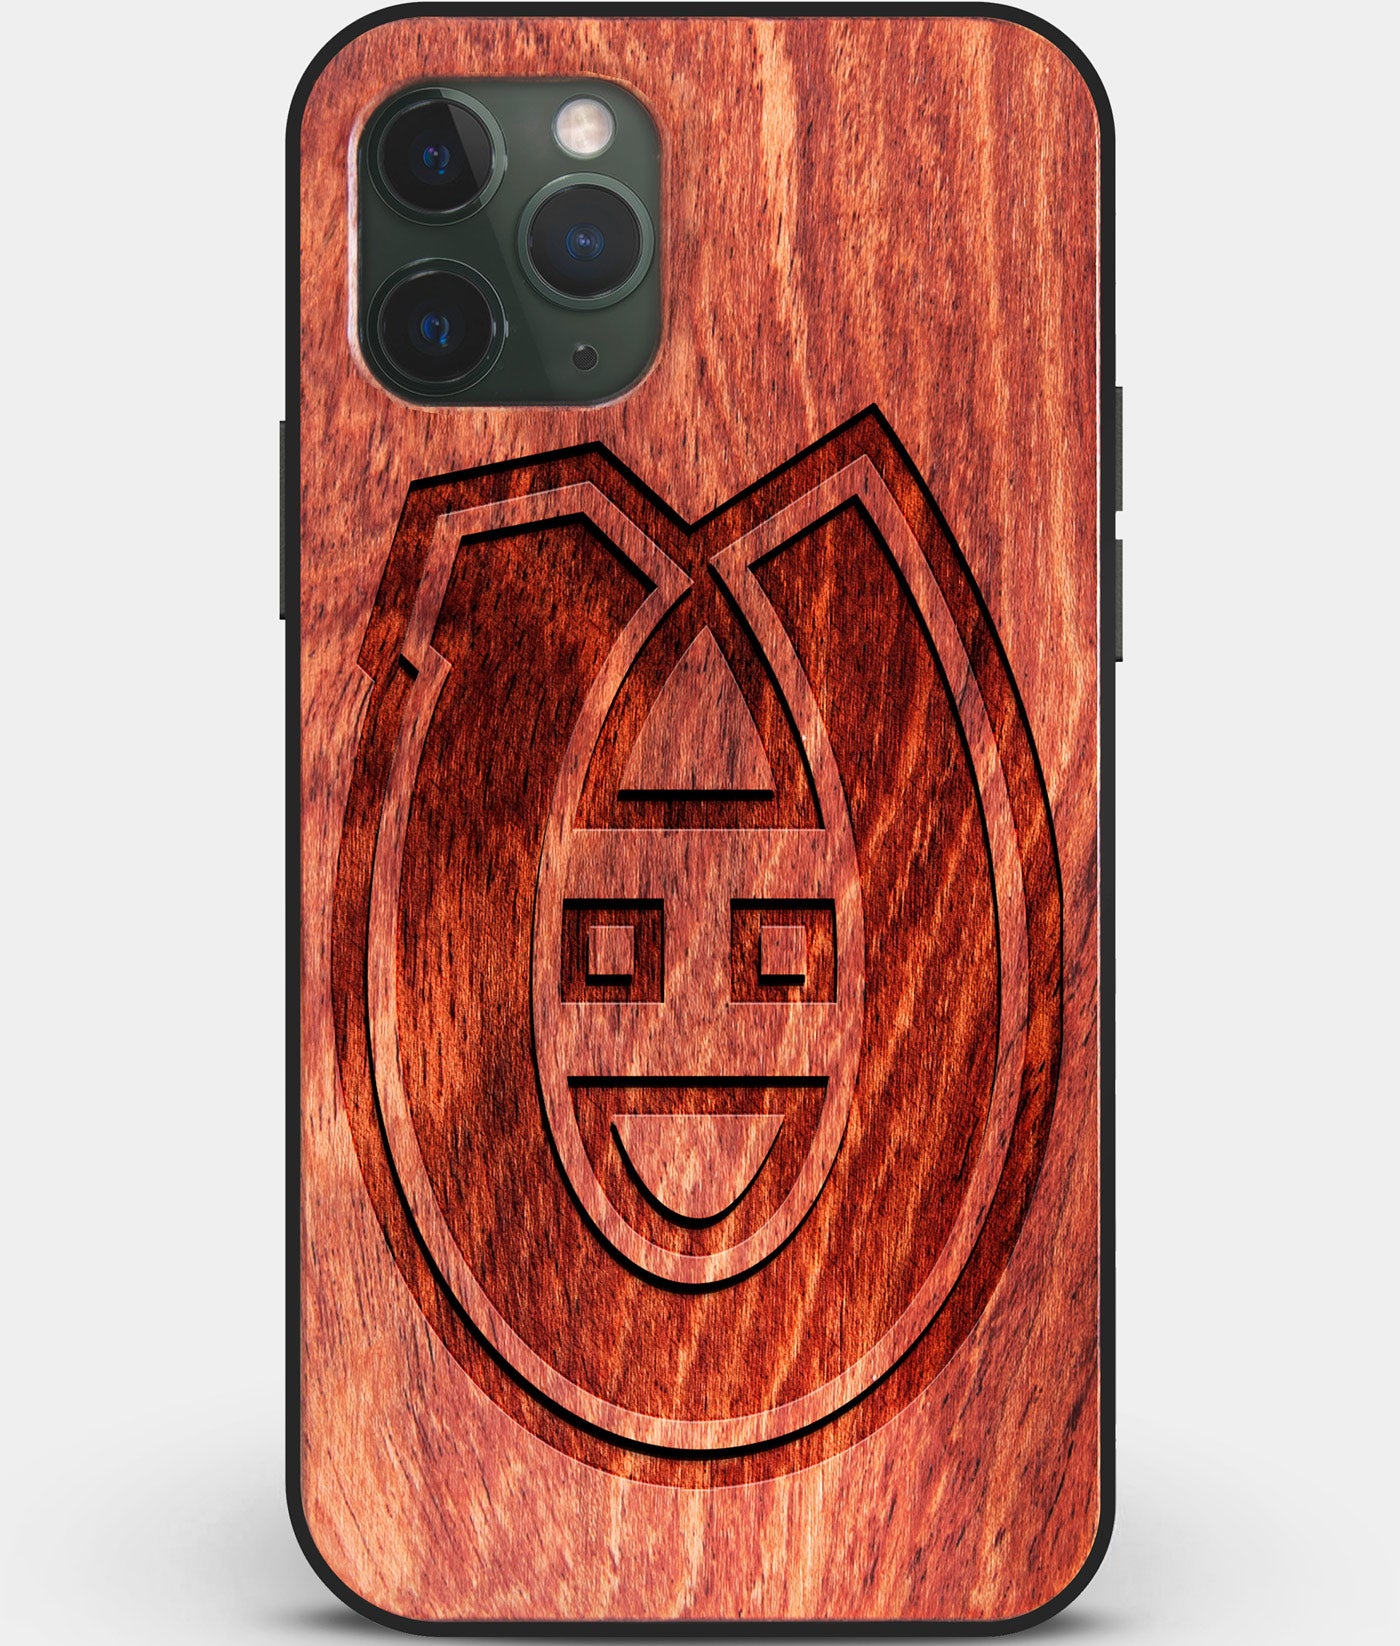 Custom Carved Wood Montreal Canadiens iPhone 11 Pro Case | Personalized Mahogany Wood Montreal Canadiens Cover, Birthday Gift, Gifts For Him, Monogrammed Gift For Fan | by Engraved In Nature